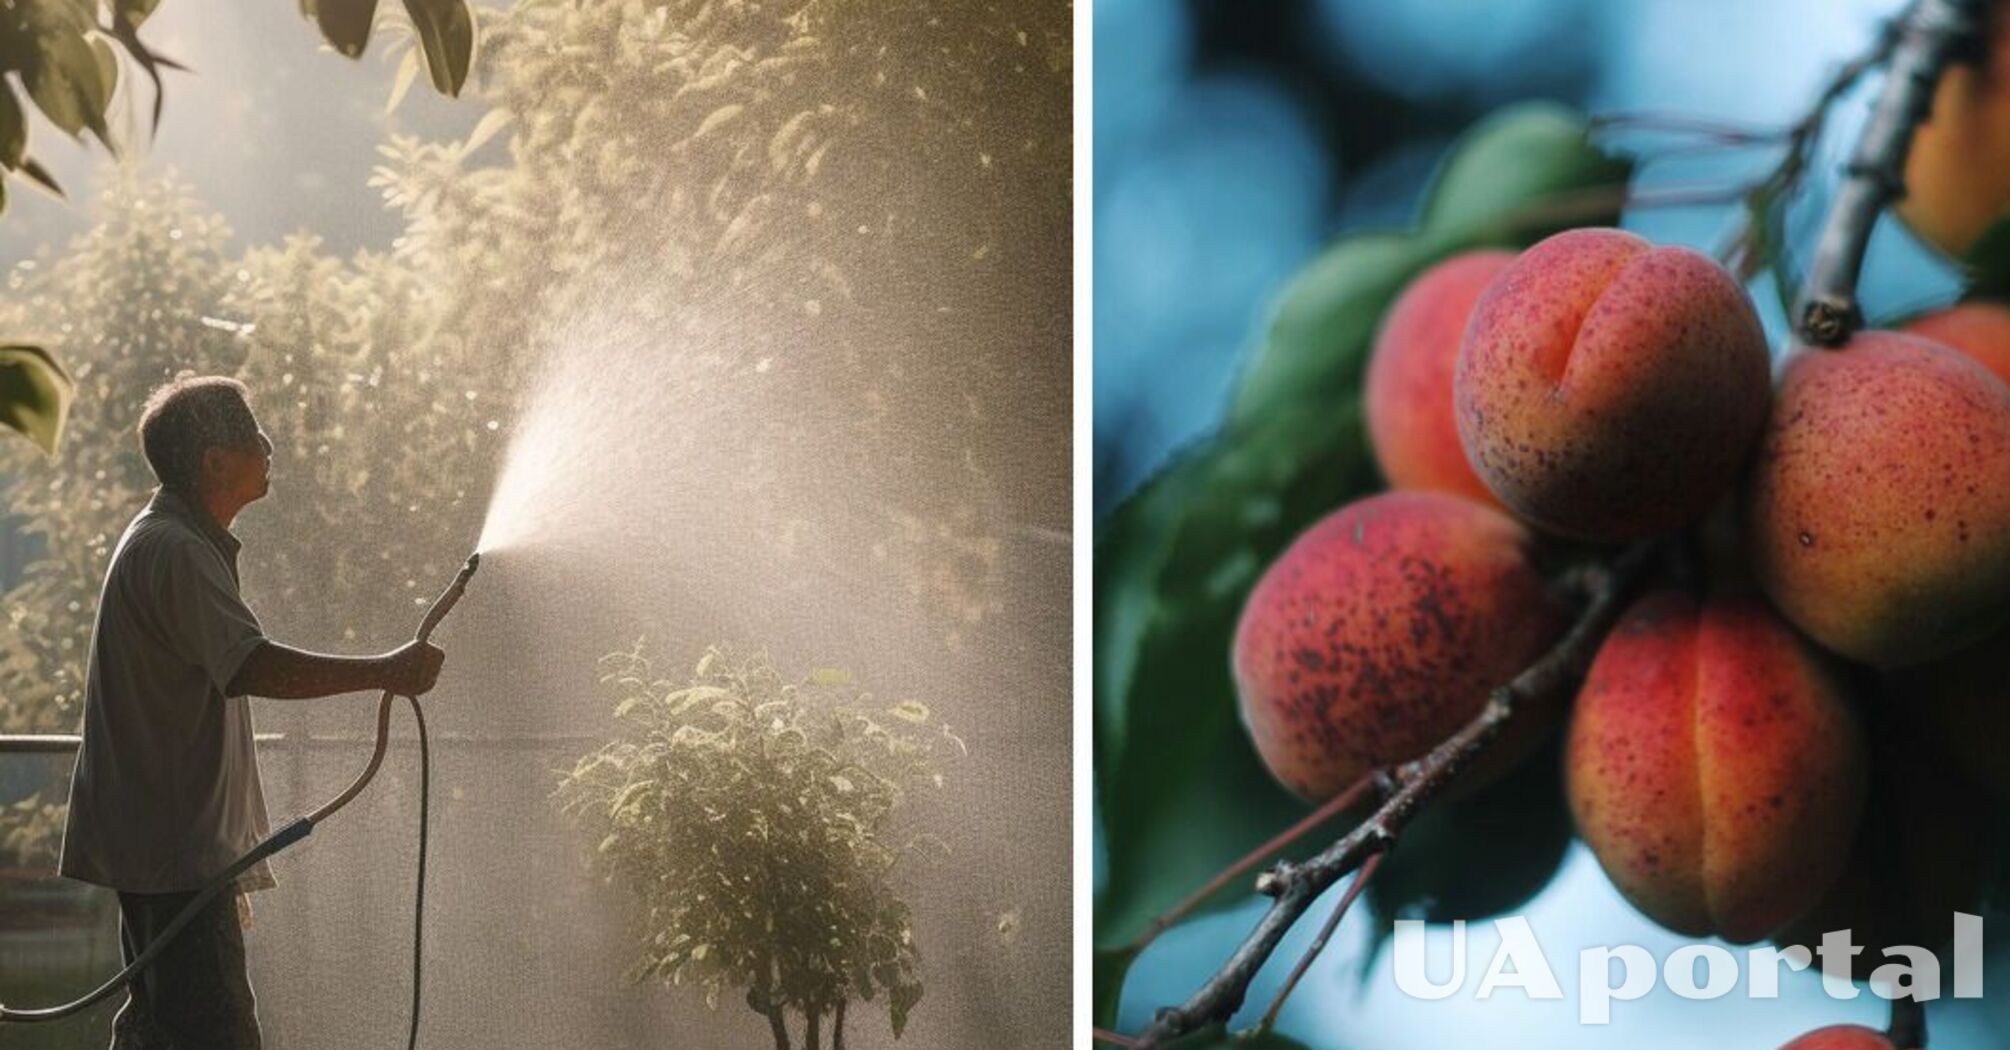 Old apricots will bear fruit again: how easy it is to help trees bear fruit